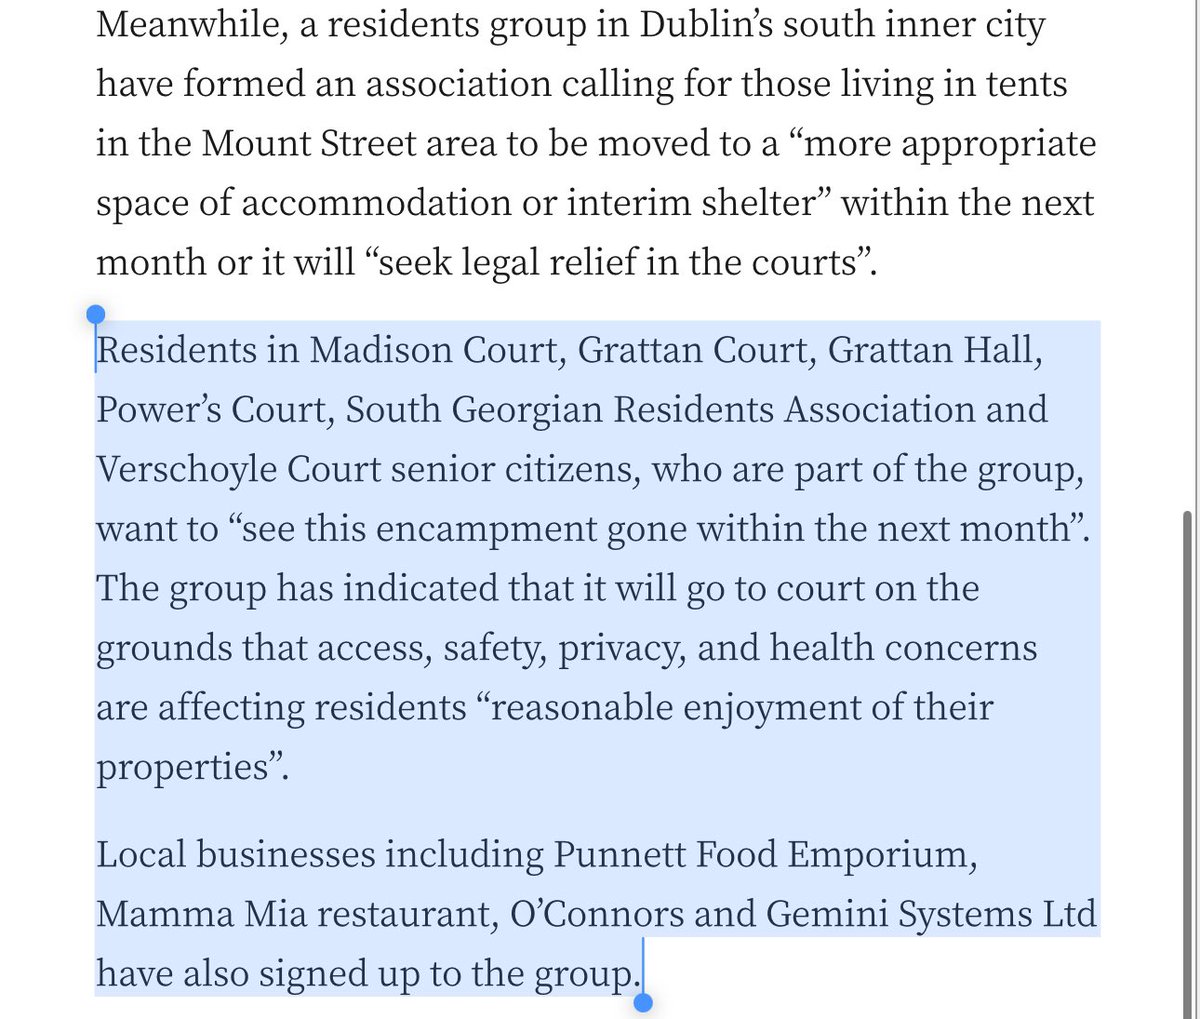 Dublin Ireland 🇮🇪 Locals around the areas of the shanty town have warned the government they have a month to get the tents moved ornate legal proceedings will commence. Residents in Madison Court, Grattan Court, Grattan Hall, Power’s Court, South Georgian Residents Association